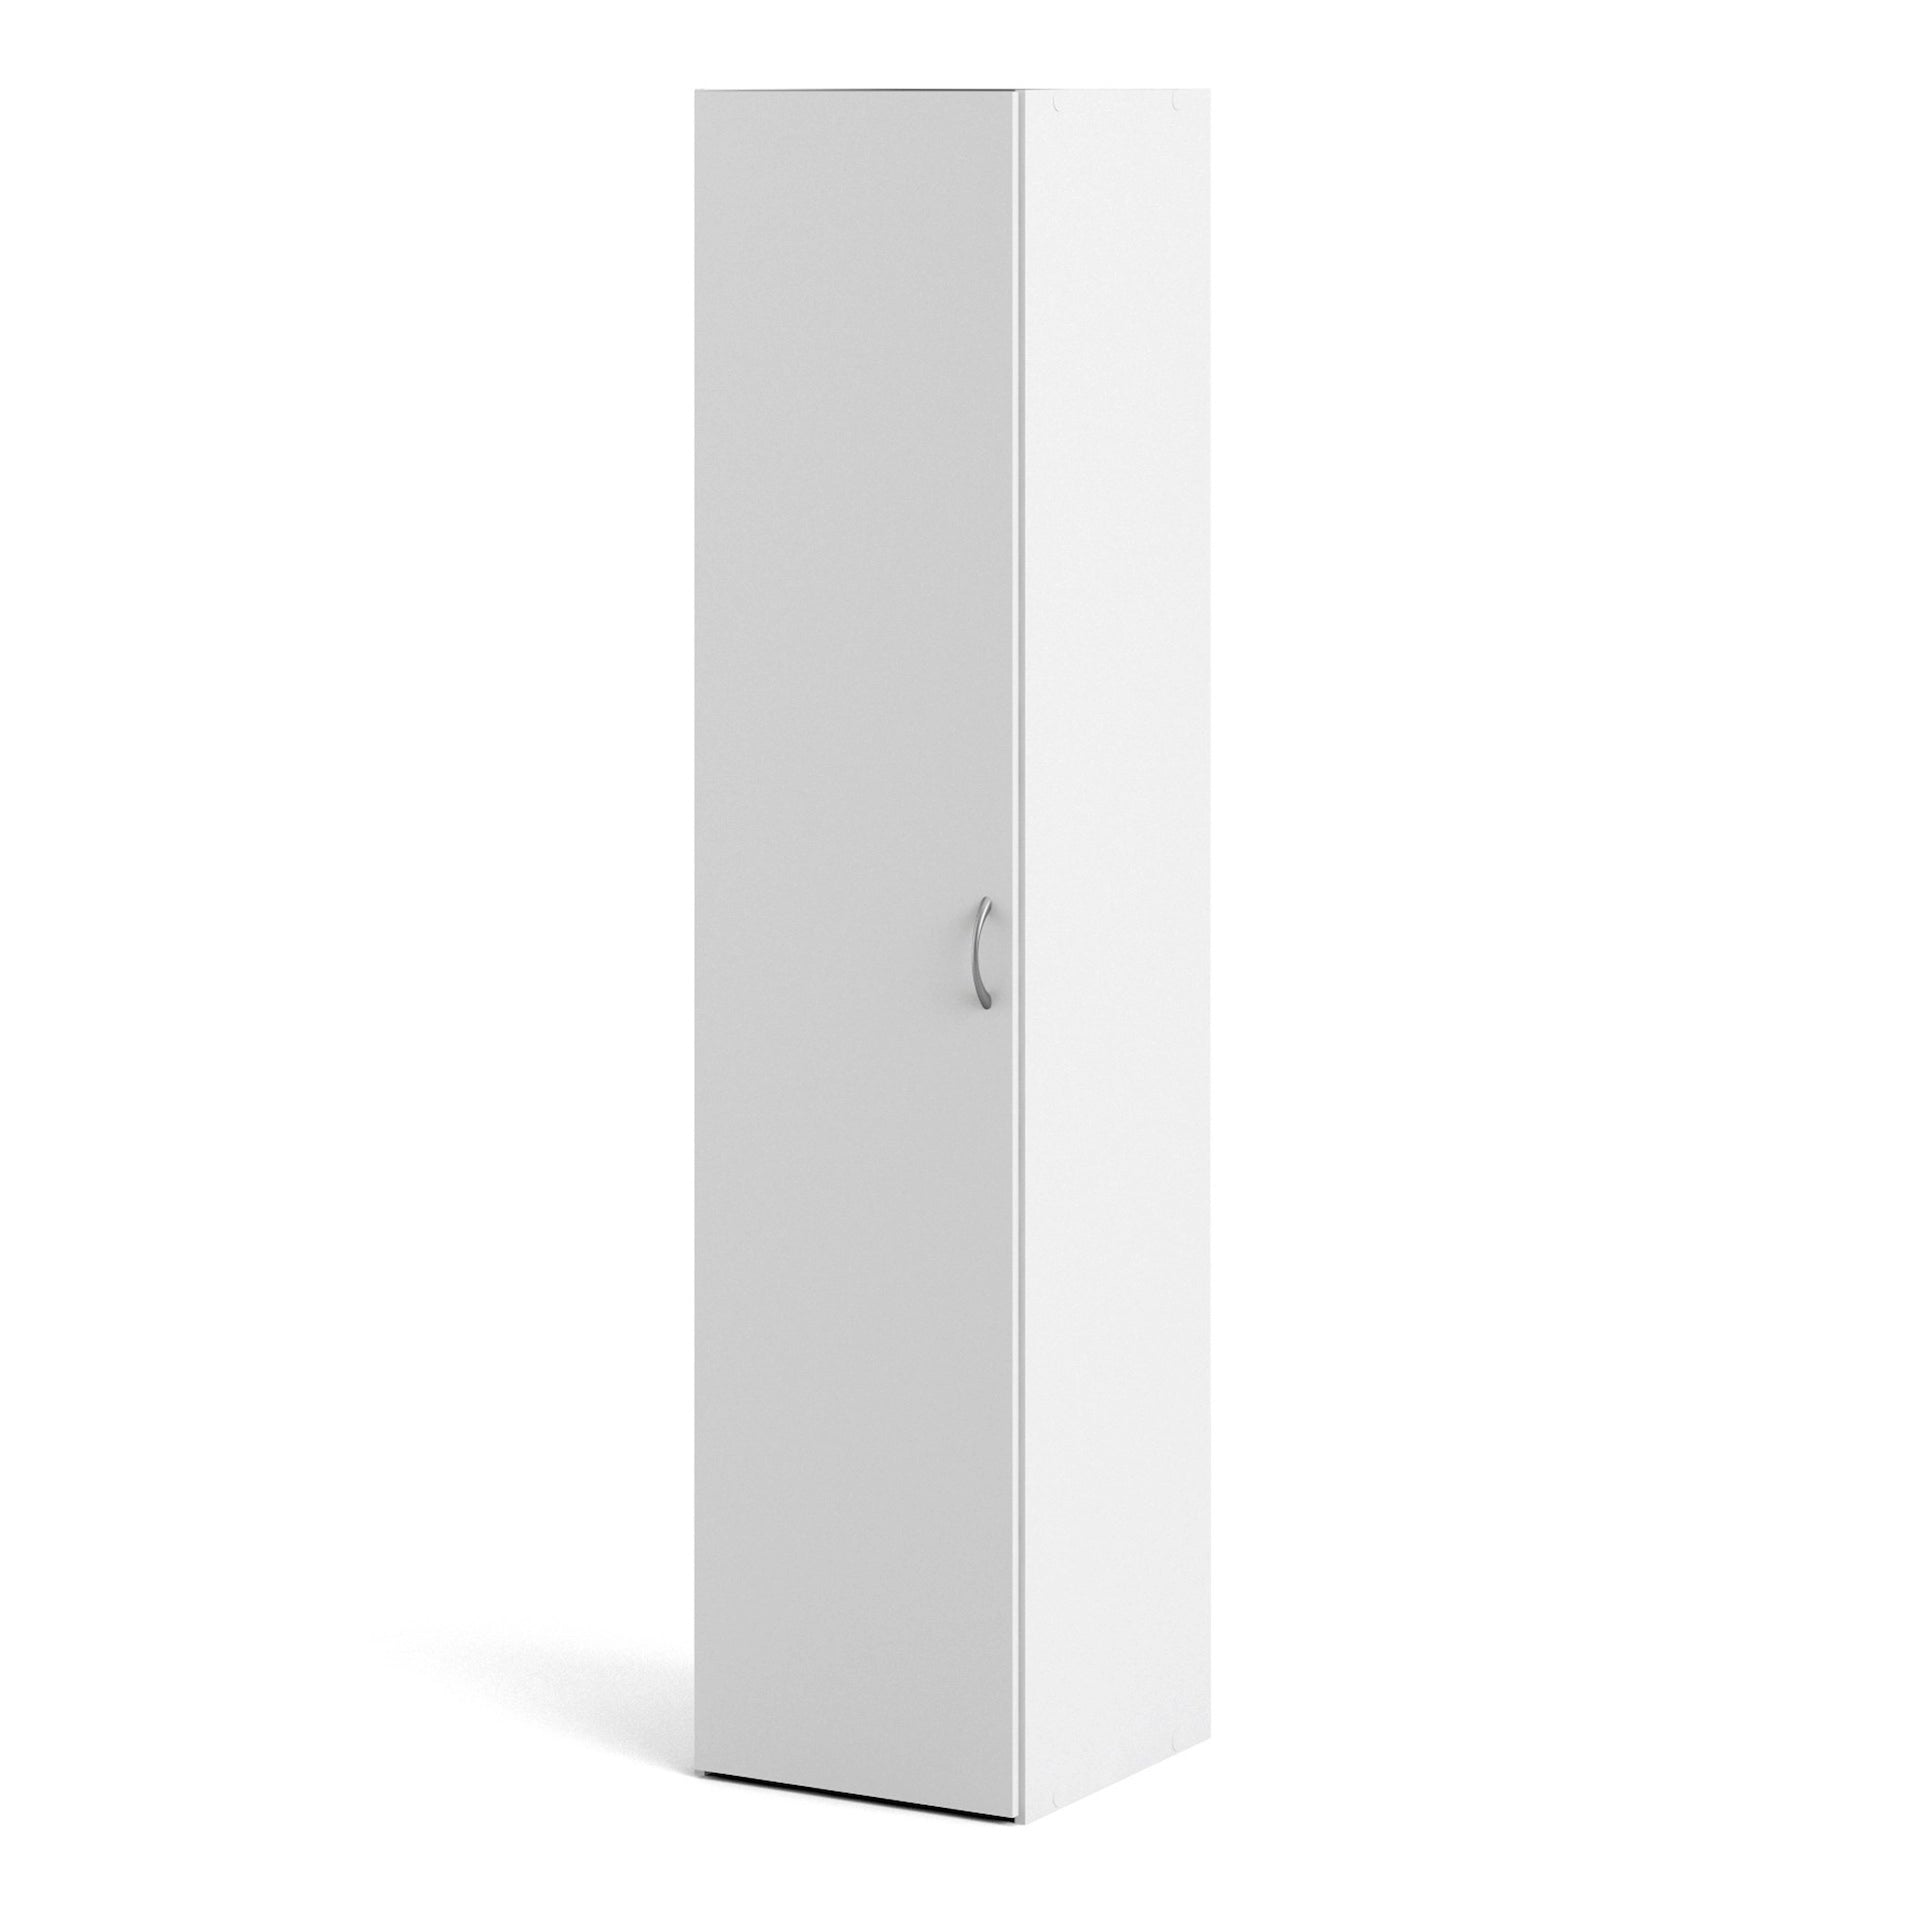 Furniture To Go Space Wardrobe with 1 Door in White